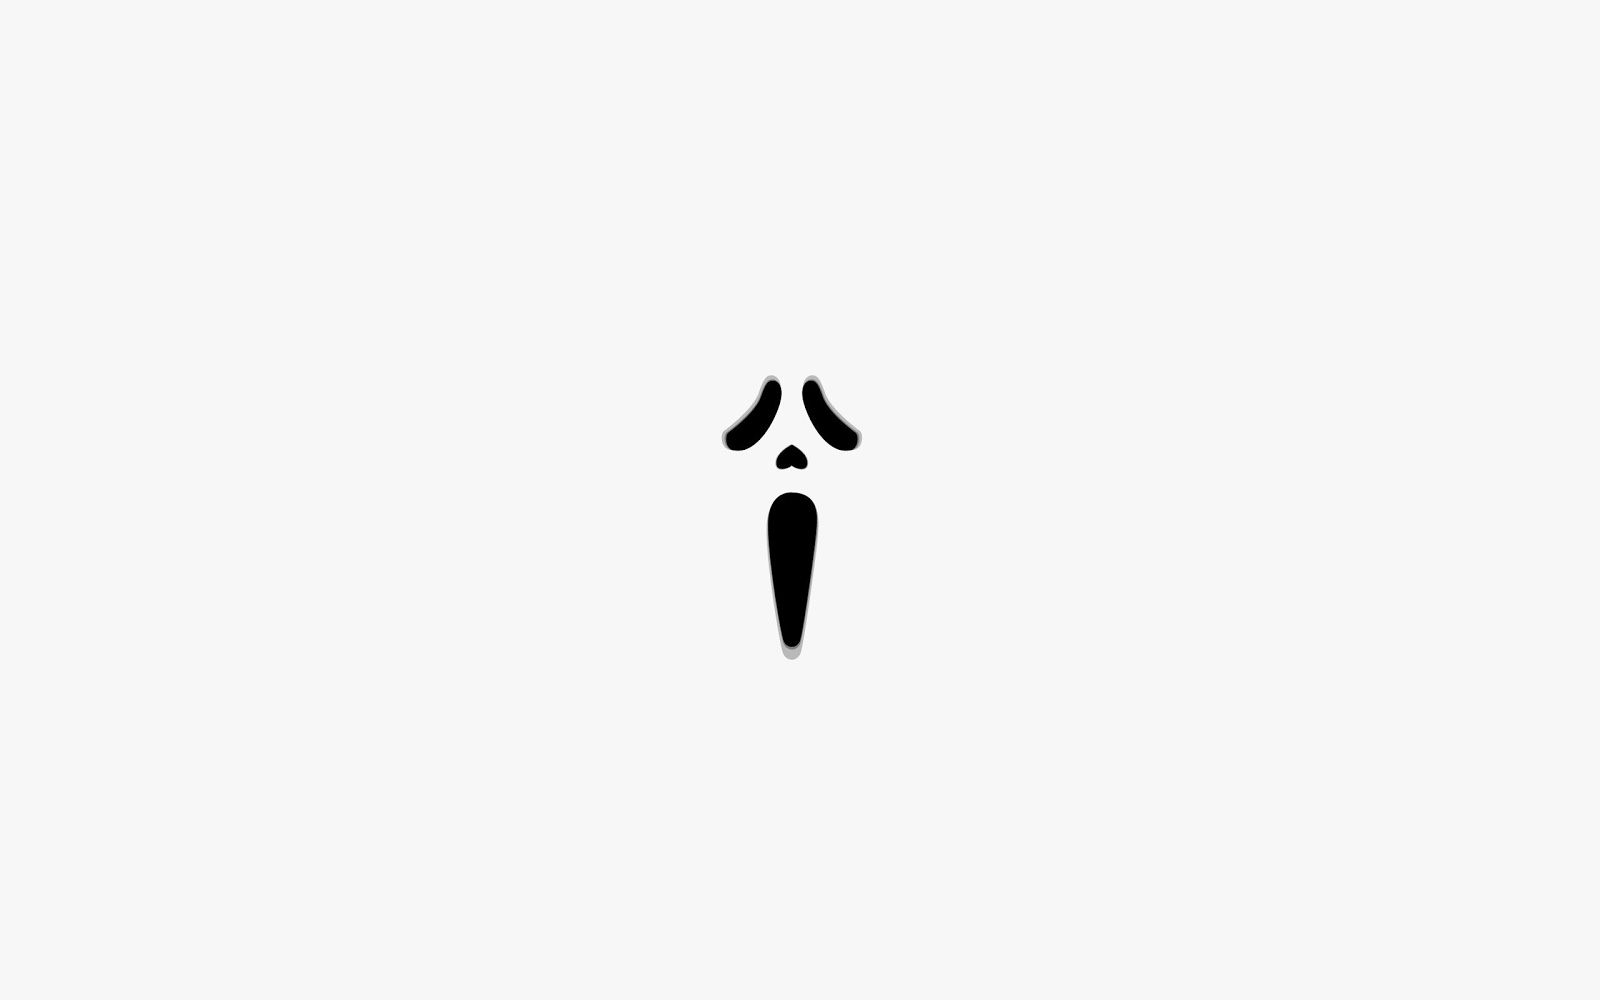 This Scream Mask White Screen wallpapers is suitable for use on